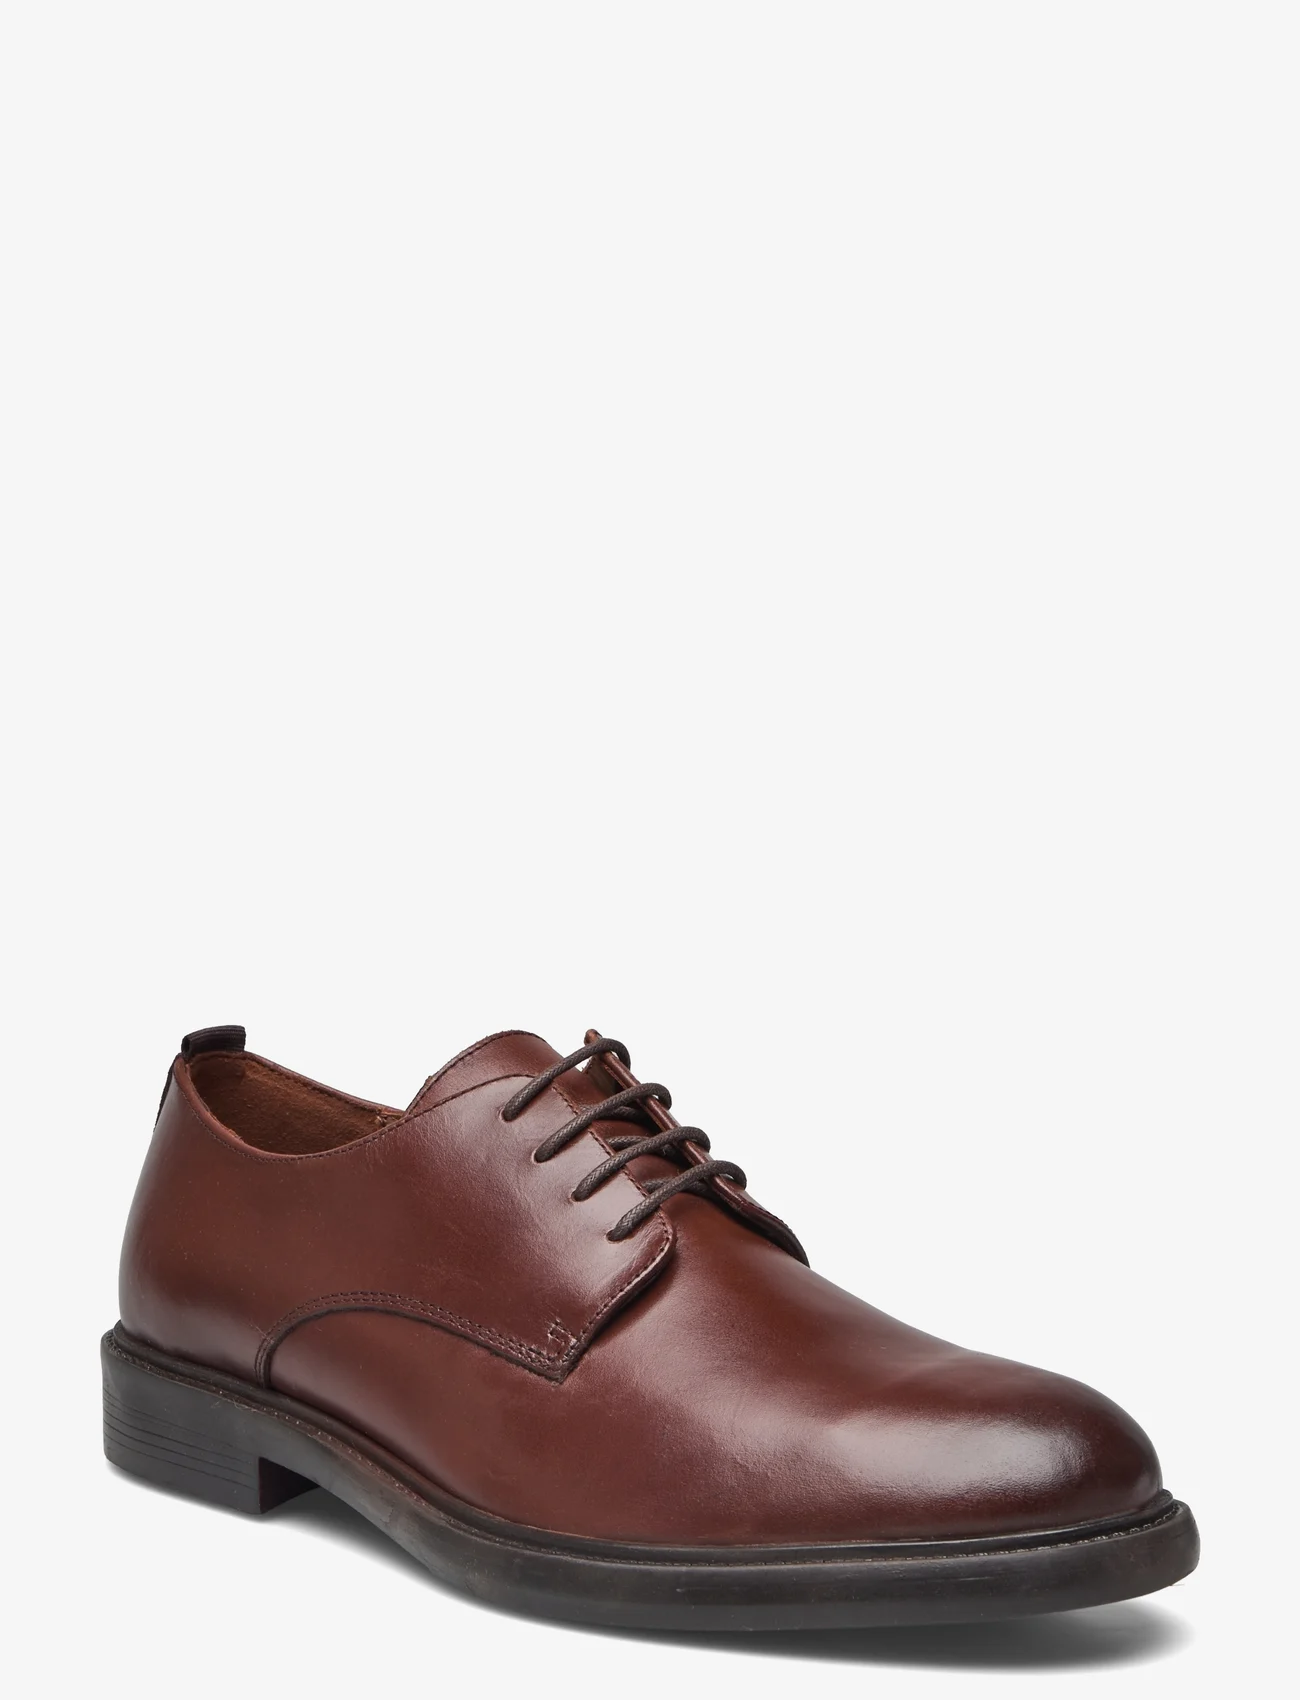 Marstrand - ADRIAN MARSTRAND - laced shoes - brown - 0